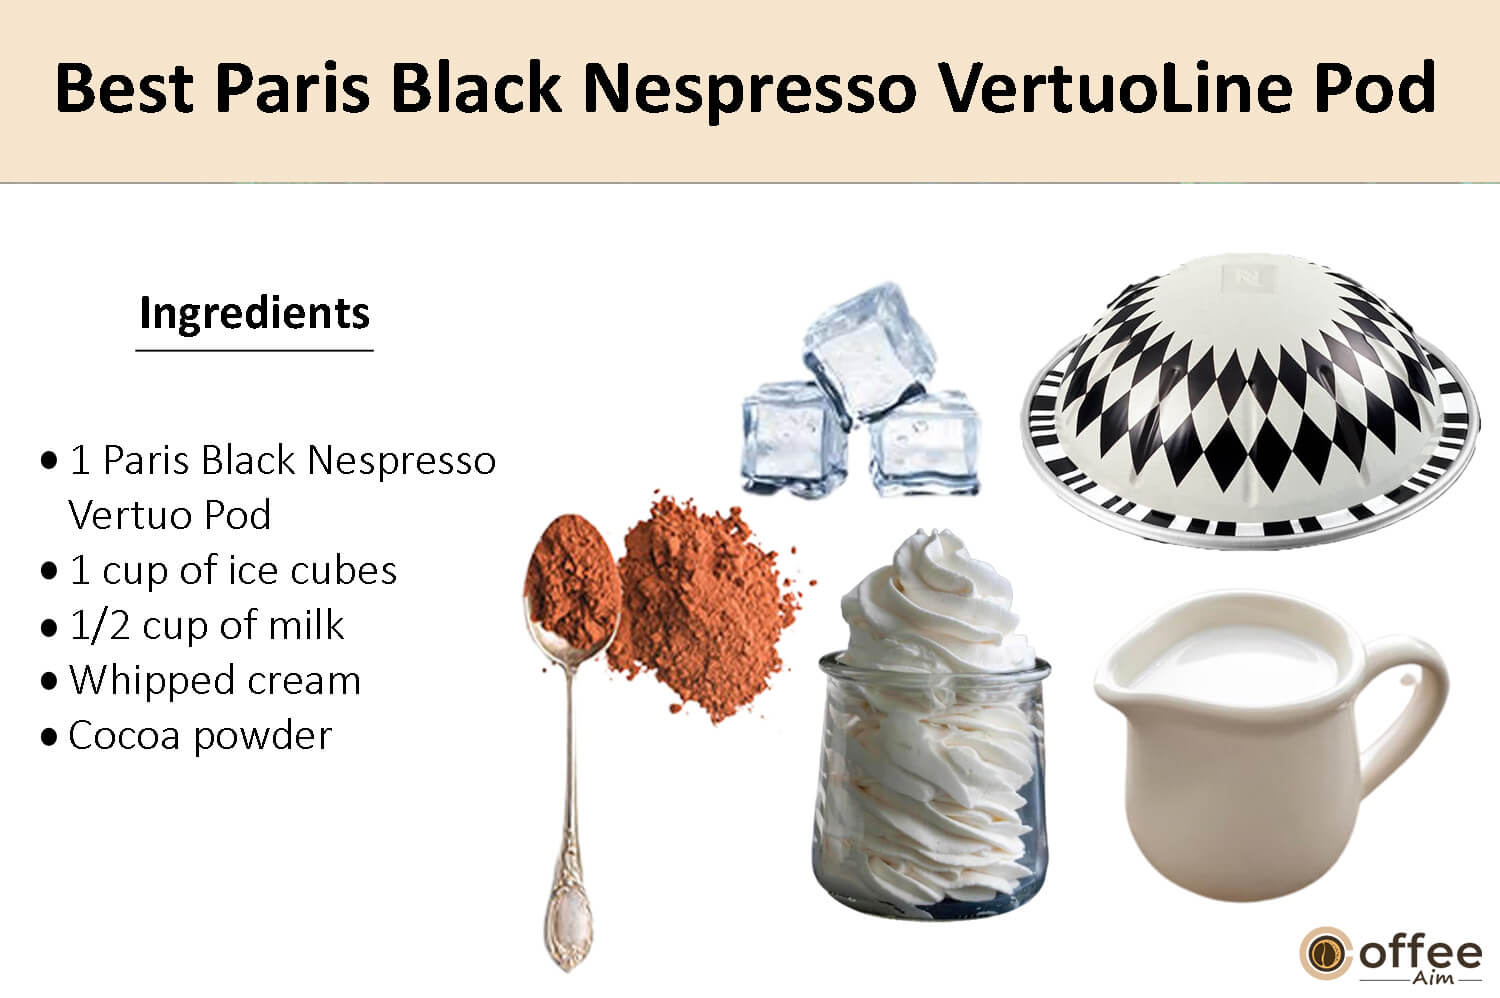 In this image, I elucidate the components that comprise the finest Nespresso Paris Black Vertuo coffee pod.